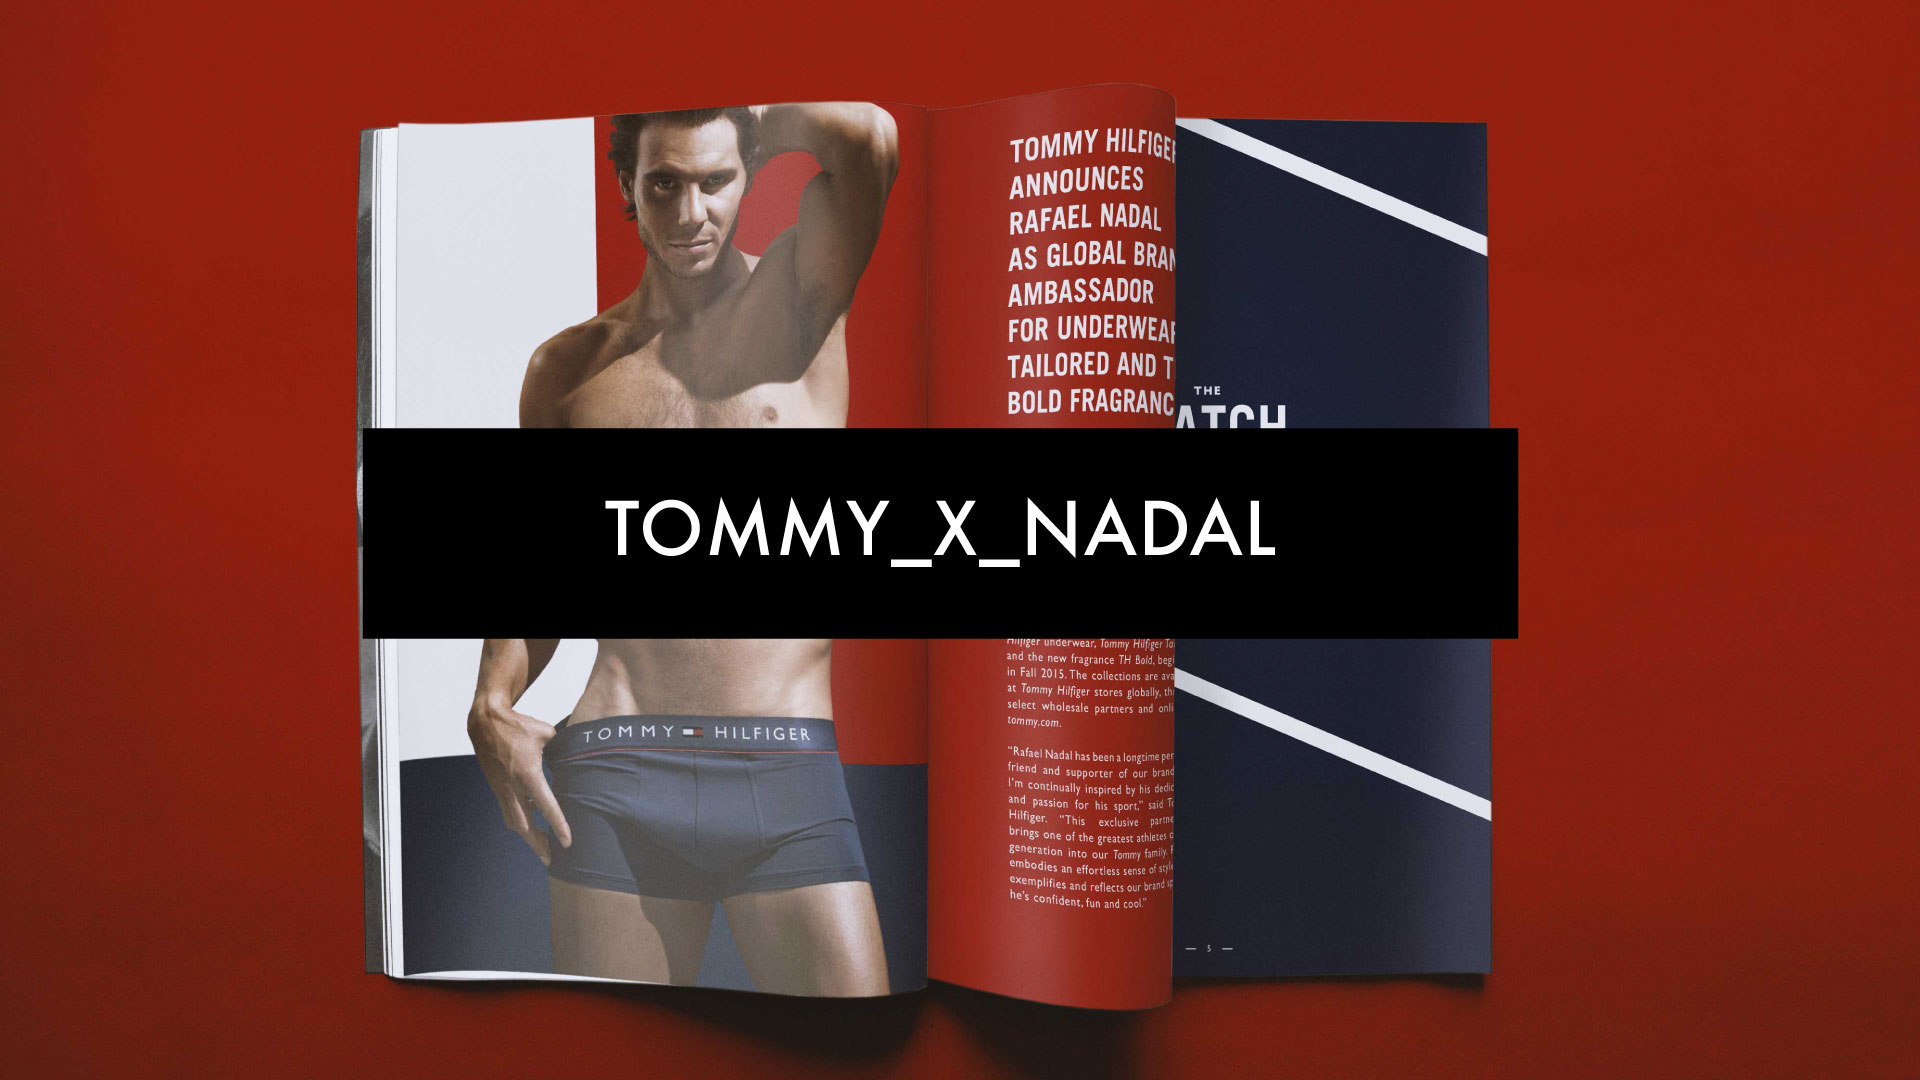 Tommy Hilfiger launches underwear collection and campaign with